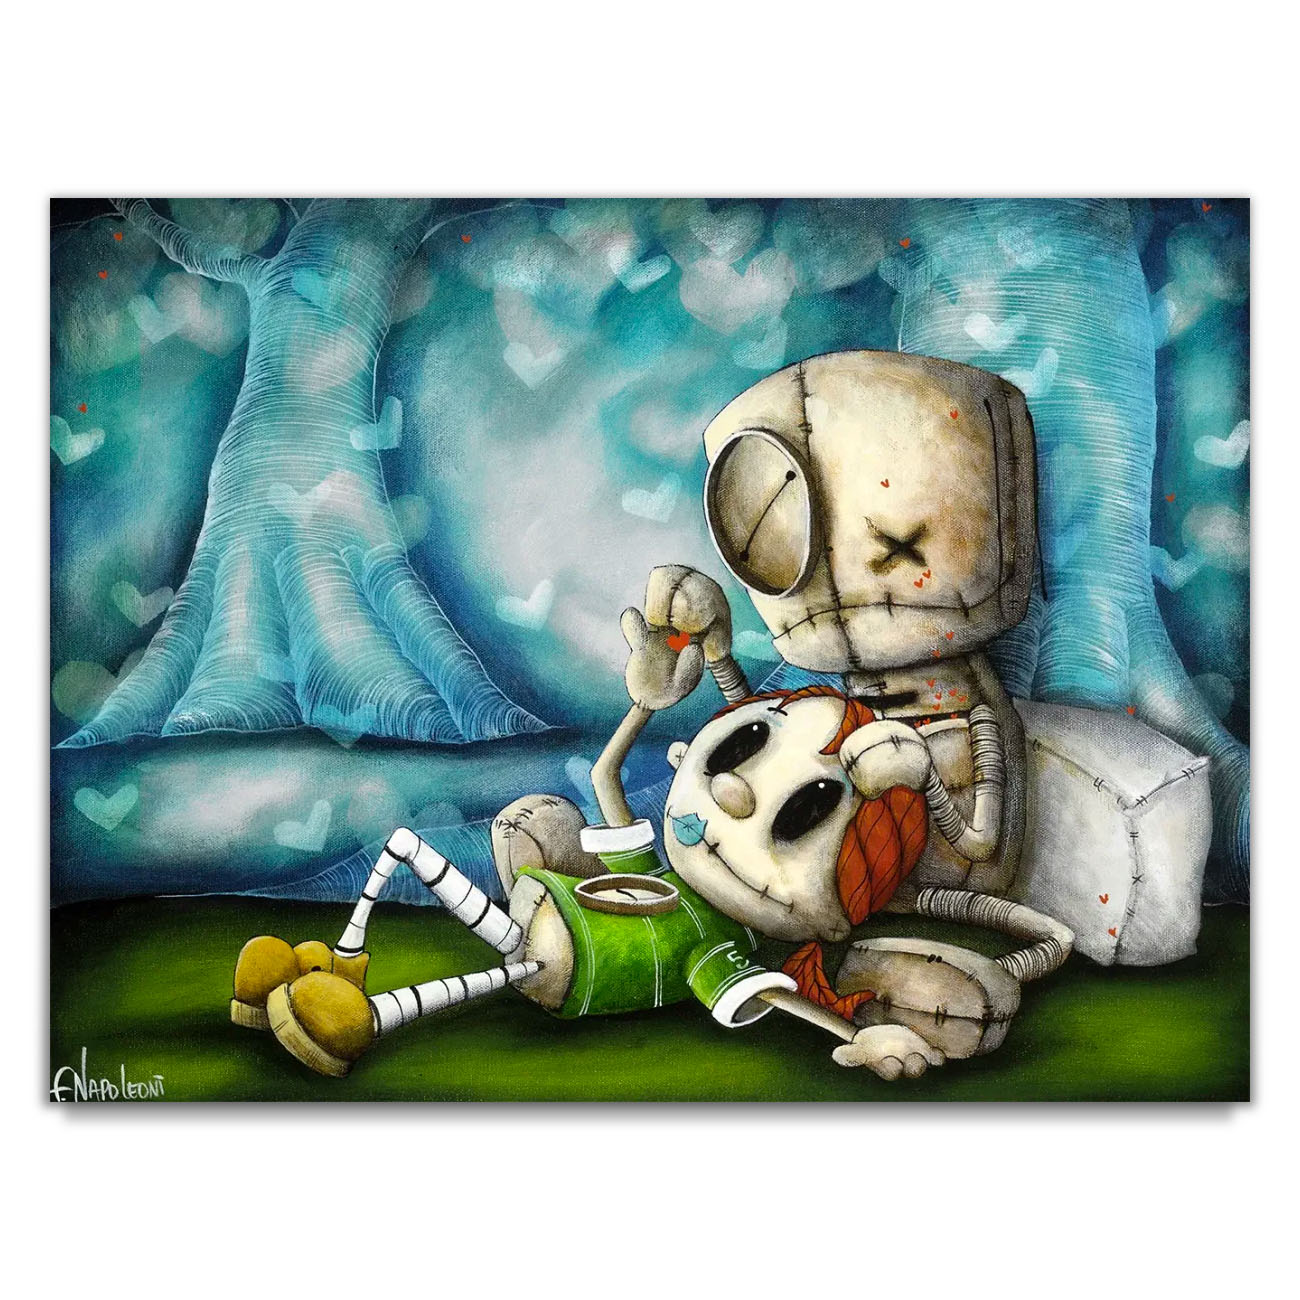 Fabio Napoleoni "I Just Want to Baby You" Limited Edition Canvas Giclee